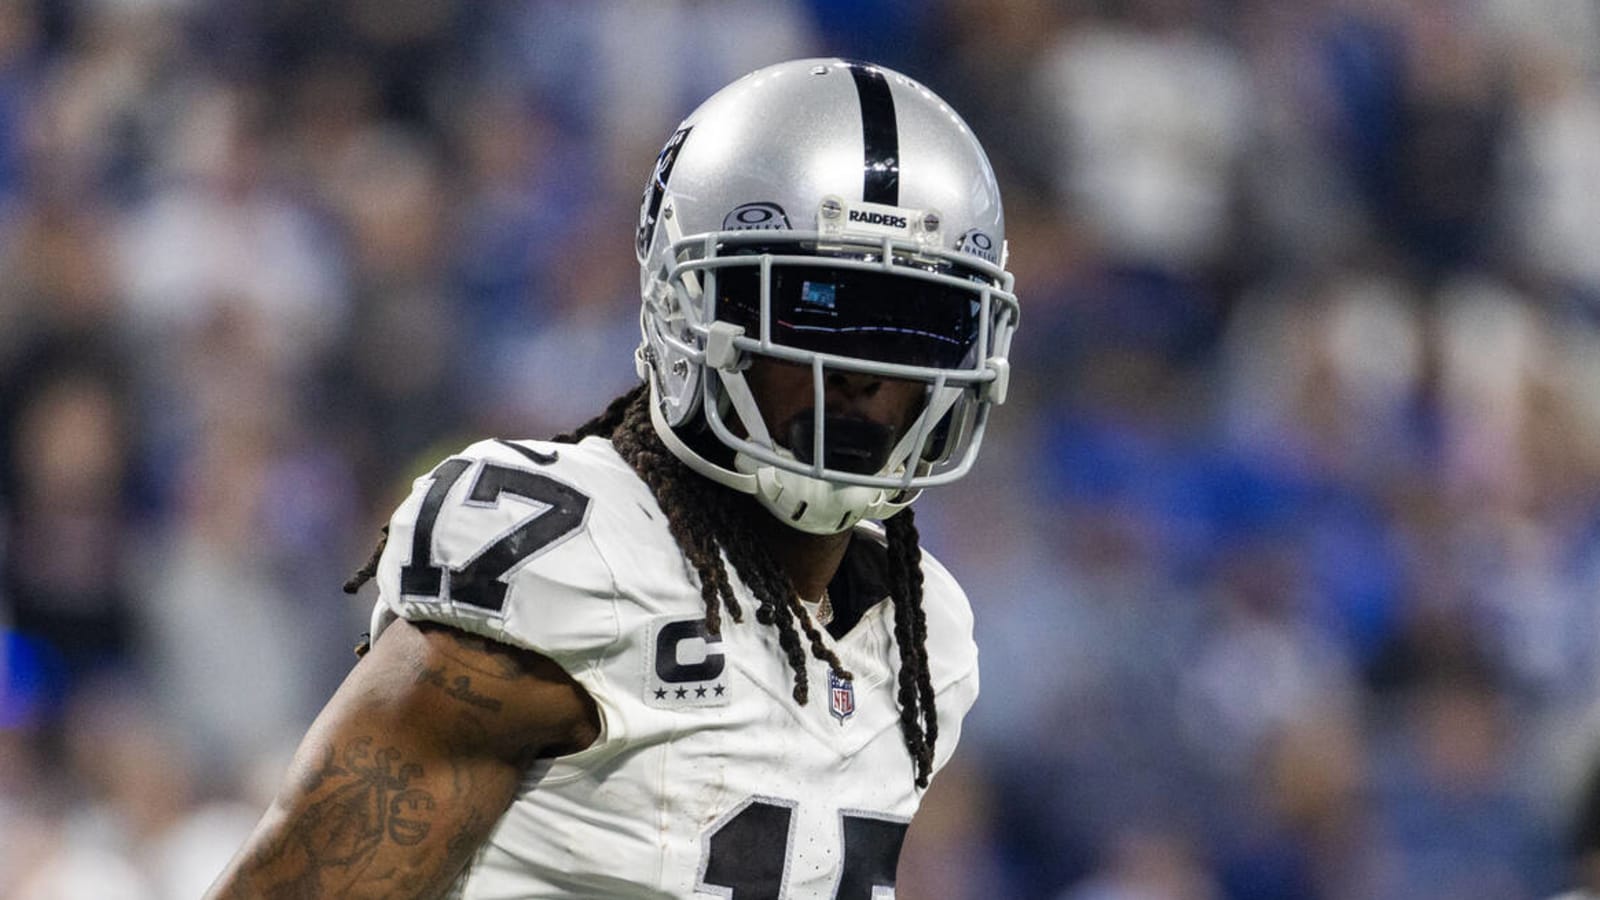 Davante Adams hints he may have jumped the gun in requesting trade to Raiders